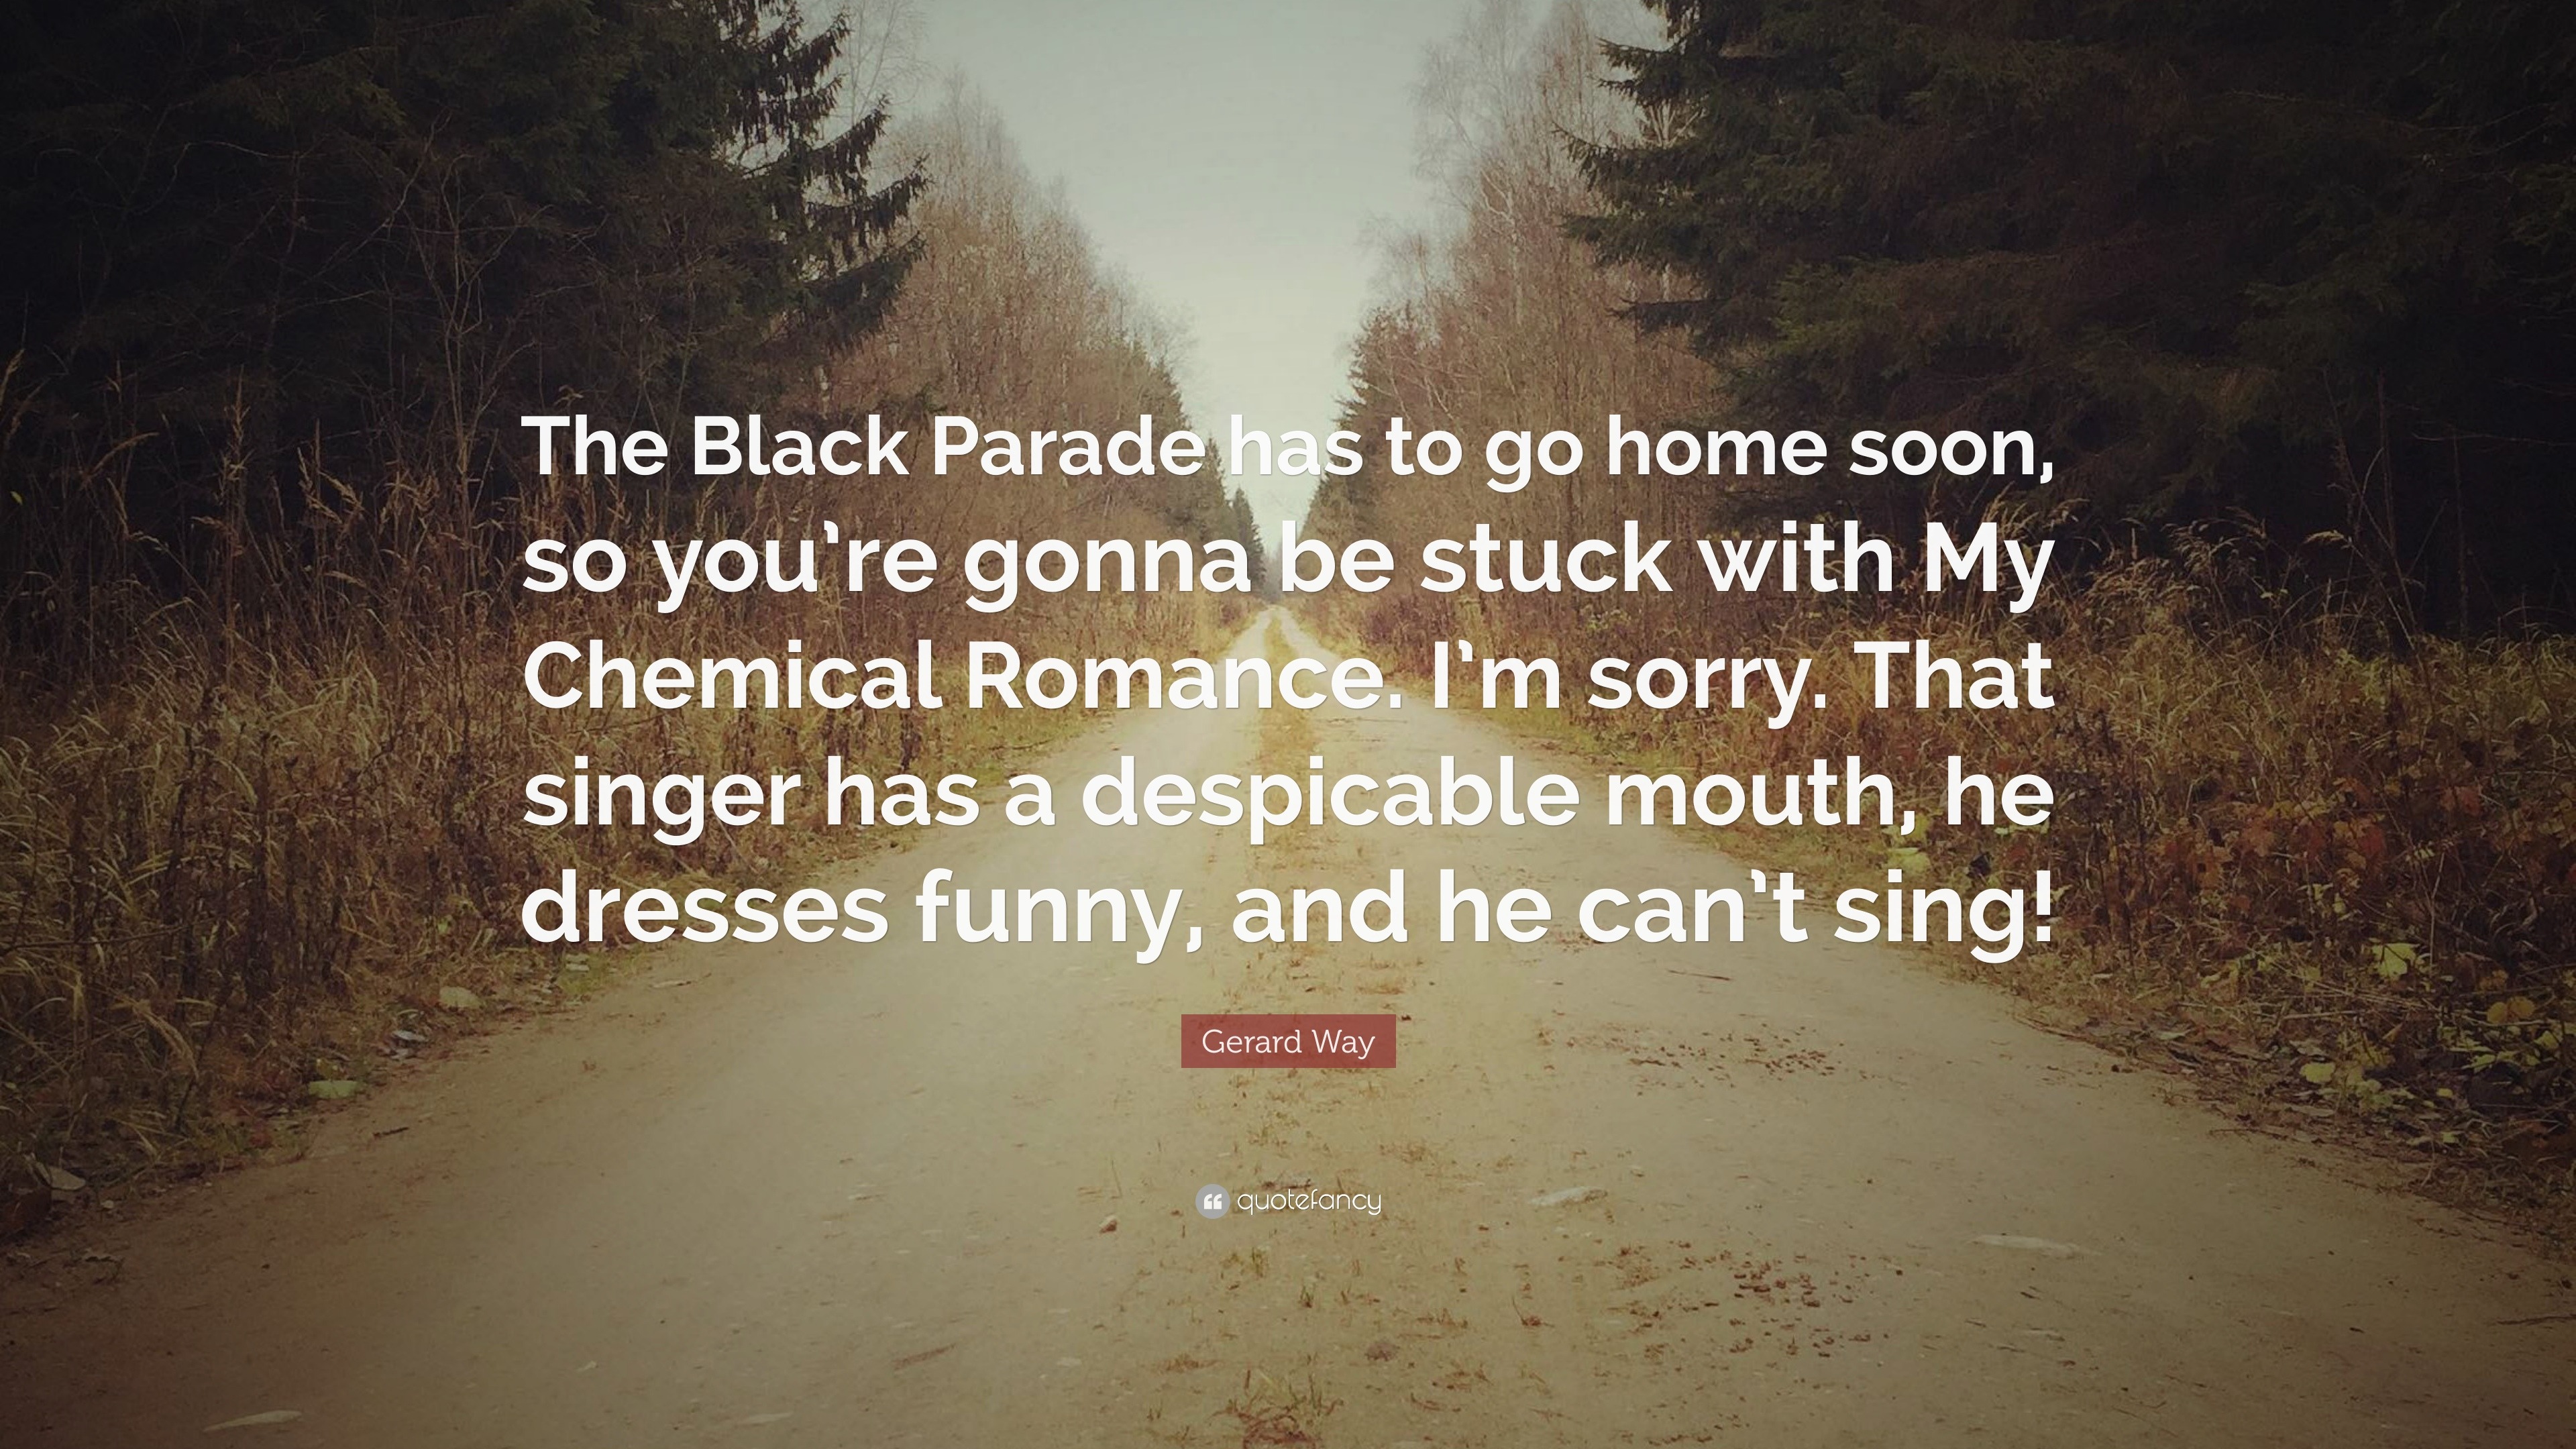 Gerard Way Quote: “The Black Parade has to go home soon, so you're gonna be  stuck with My Chemical Romance. I'm sorry. That singer has a de...”